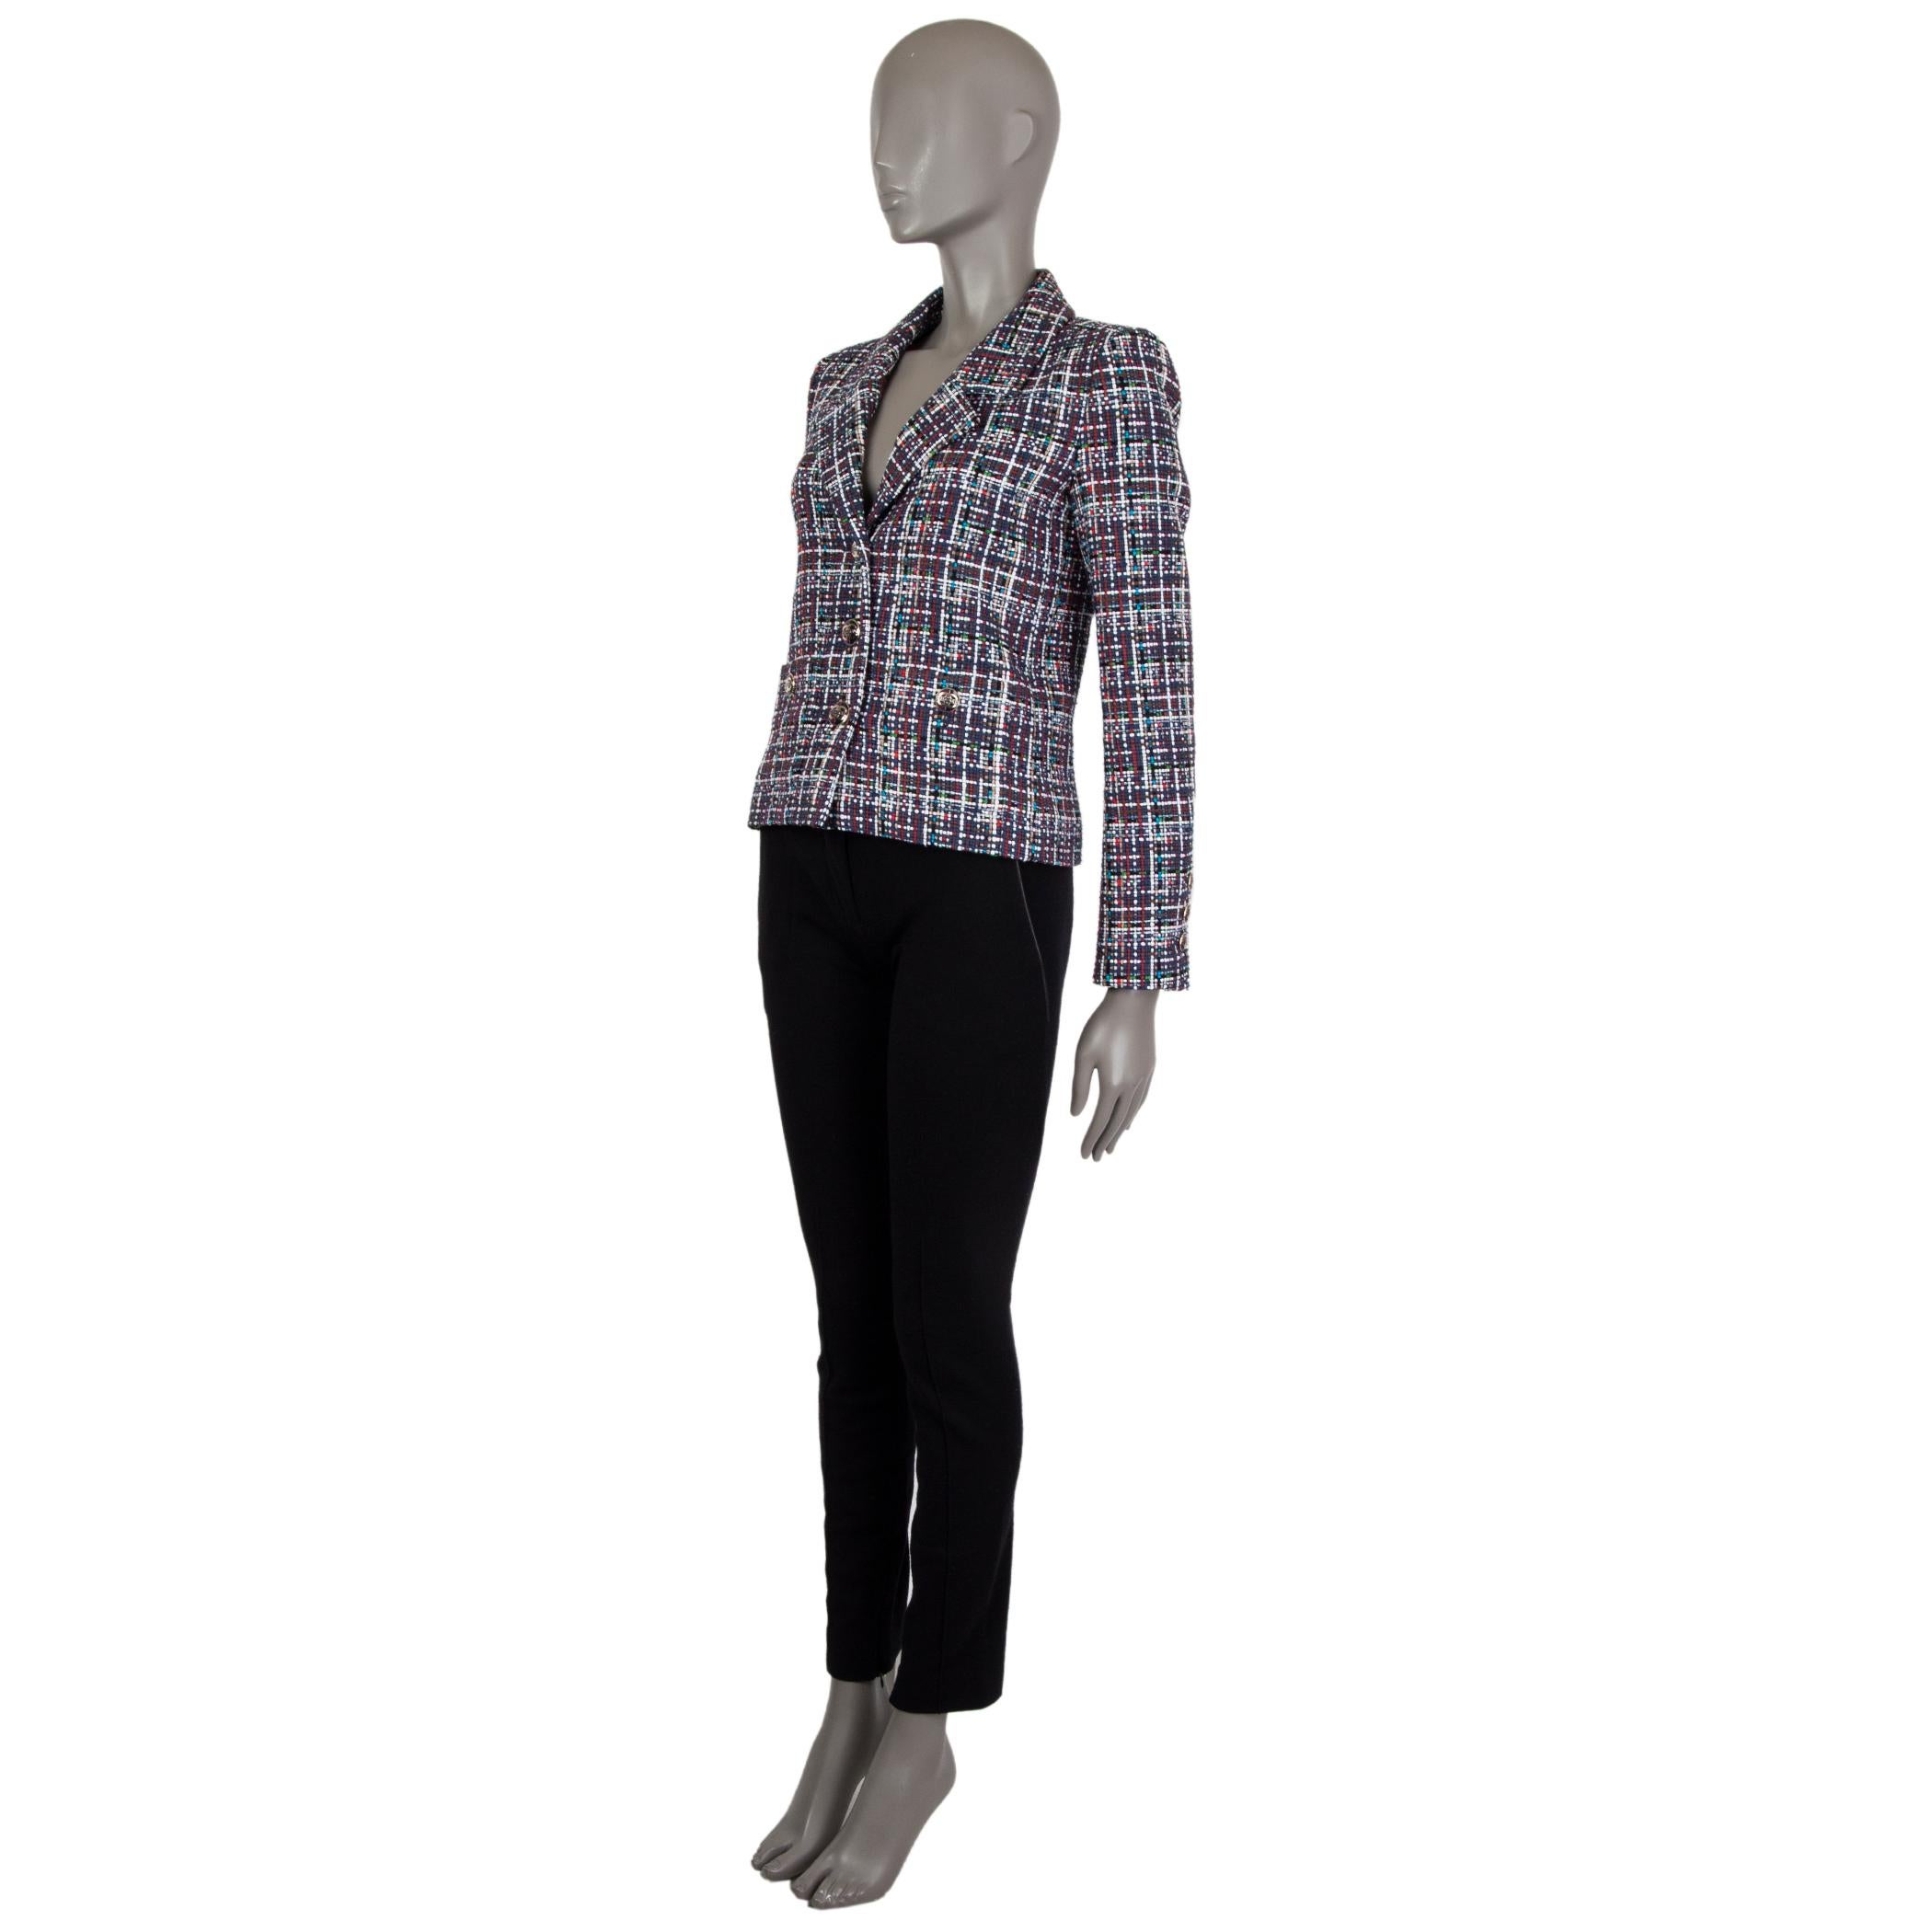 Chanel plaid-tweed blazer in navy, white, red, cyan, green, black, beige,  and rust cotton (56%), silk (28%), and nylon (16%). With notch collar, three-button sleeves, two buttoned patch pockets on the front sides, and signature weight chain around